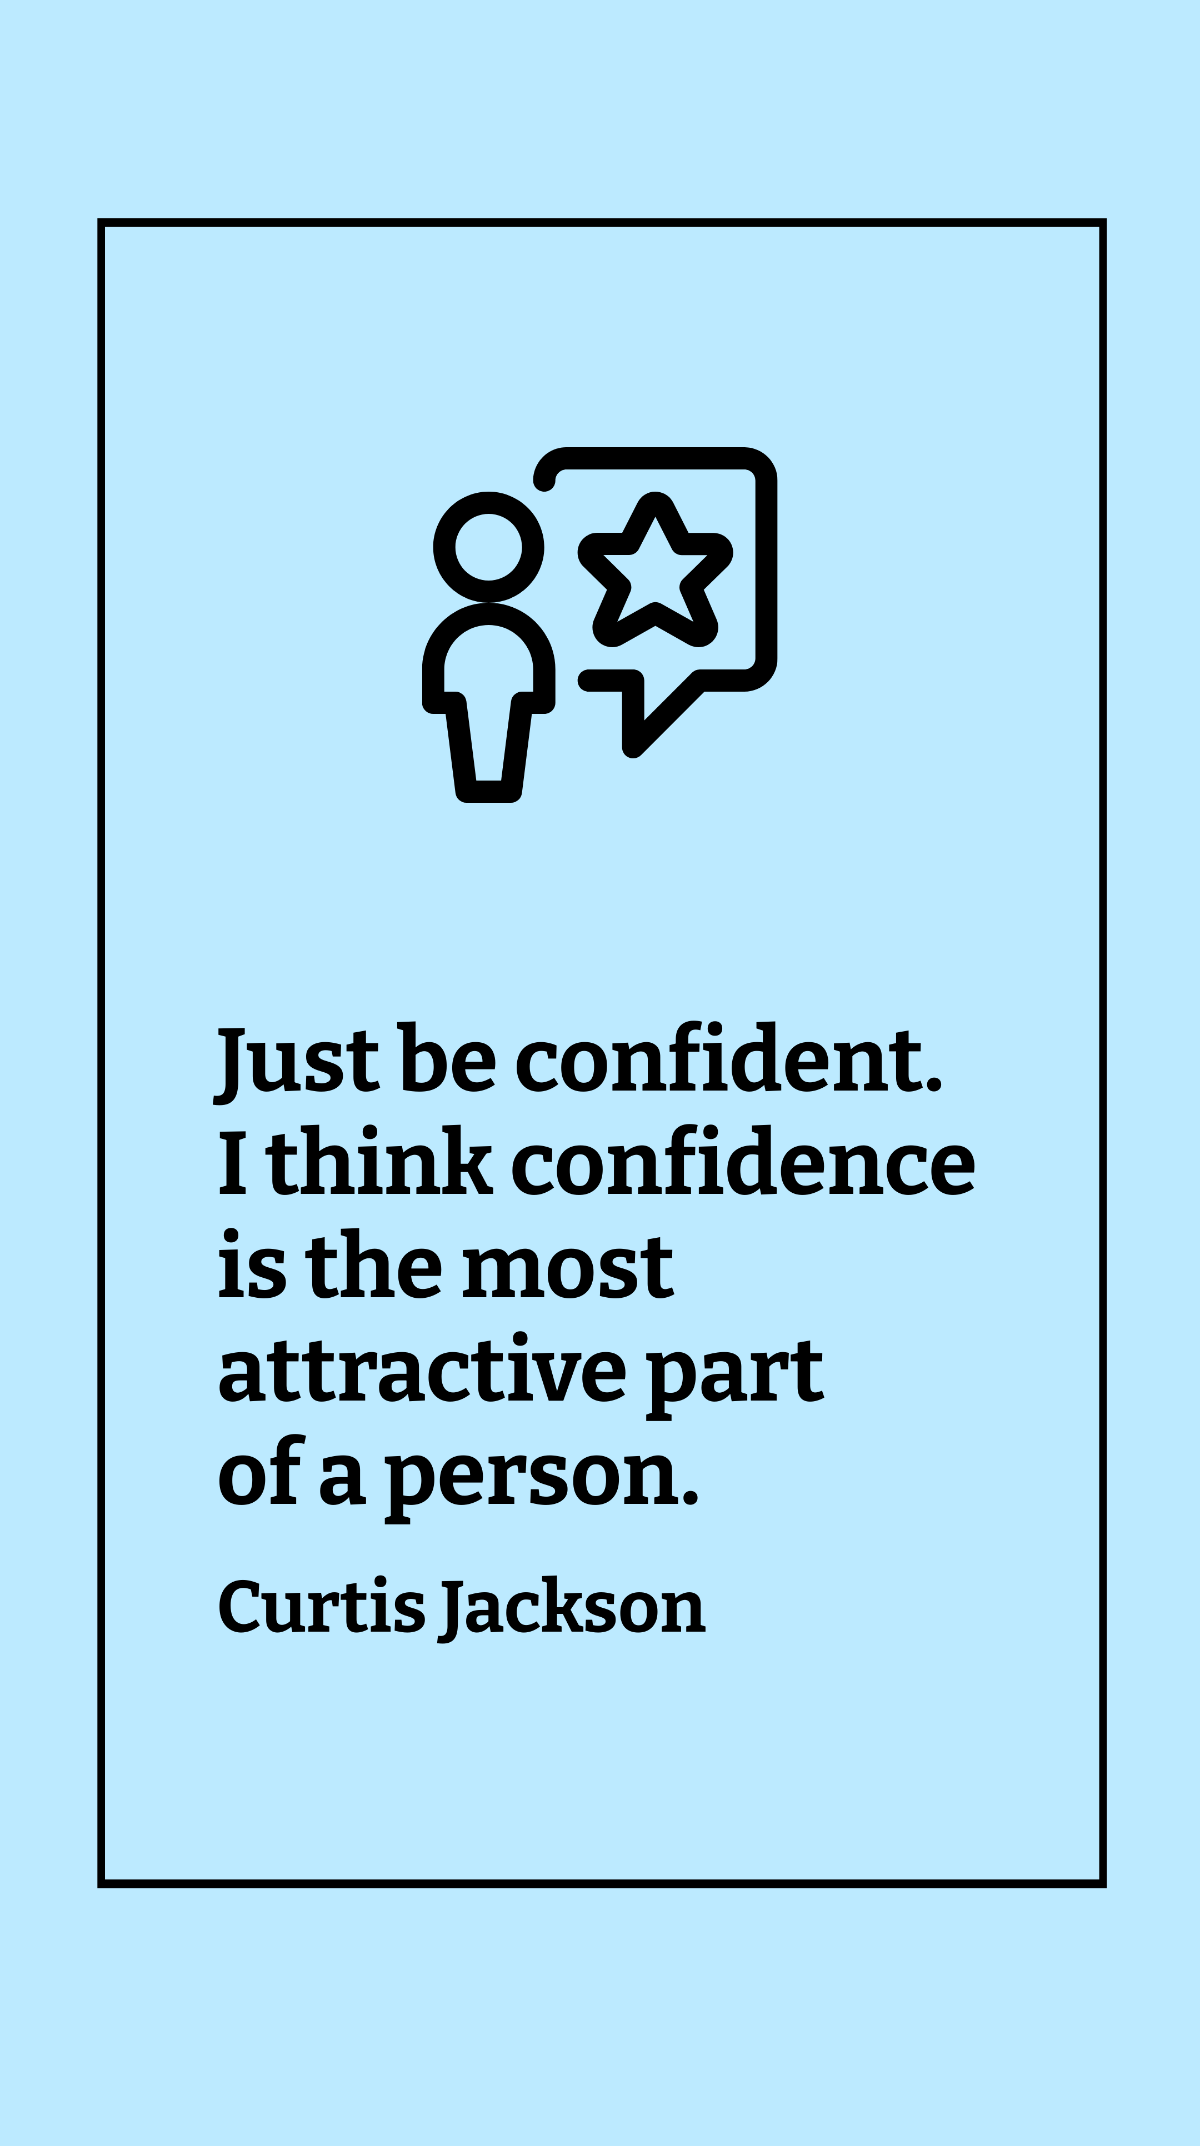 Free Curtis Jackson - Just be confident. I think confidence is the most attractive part of a person. Template